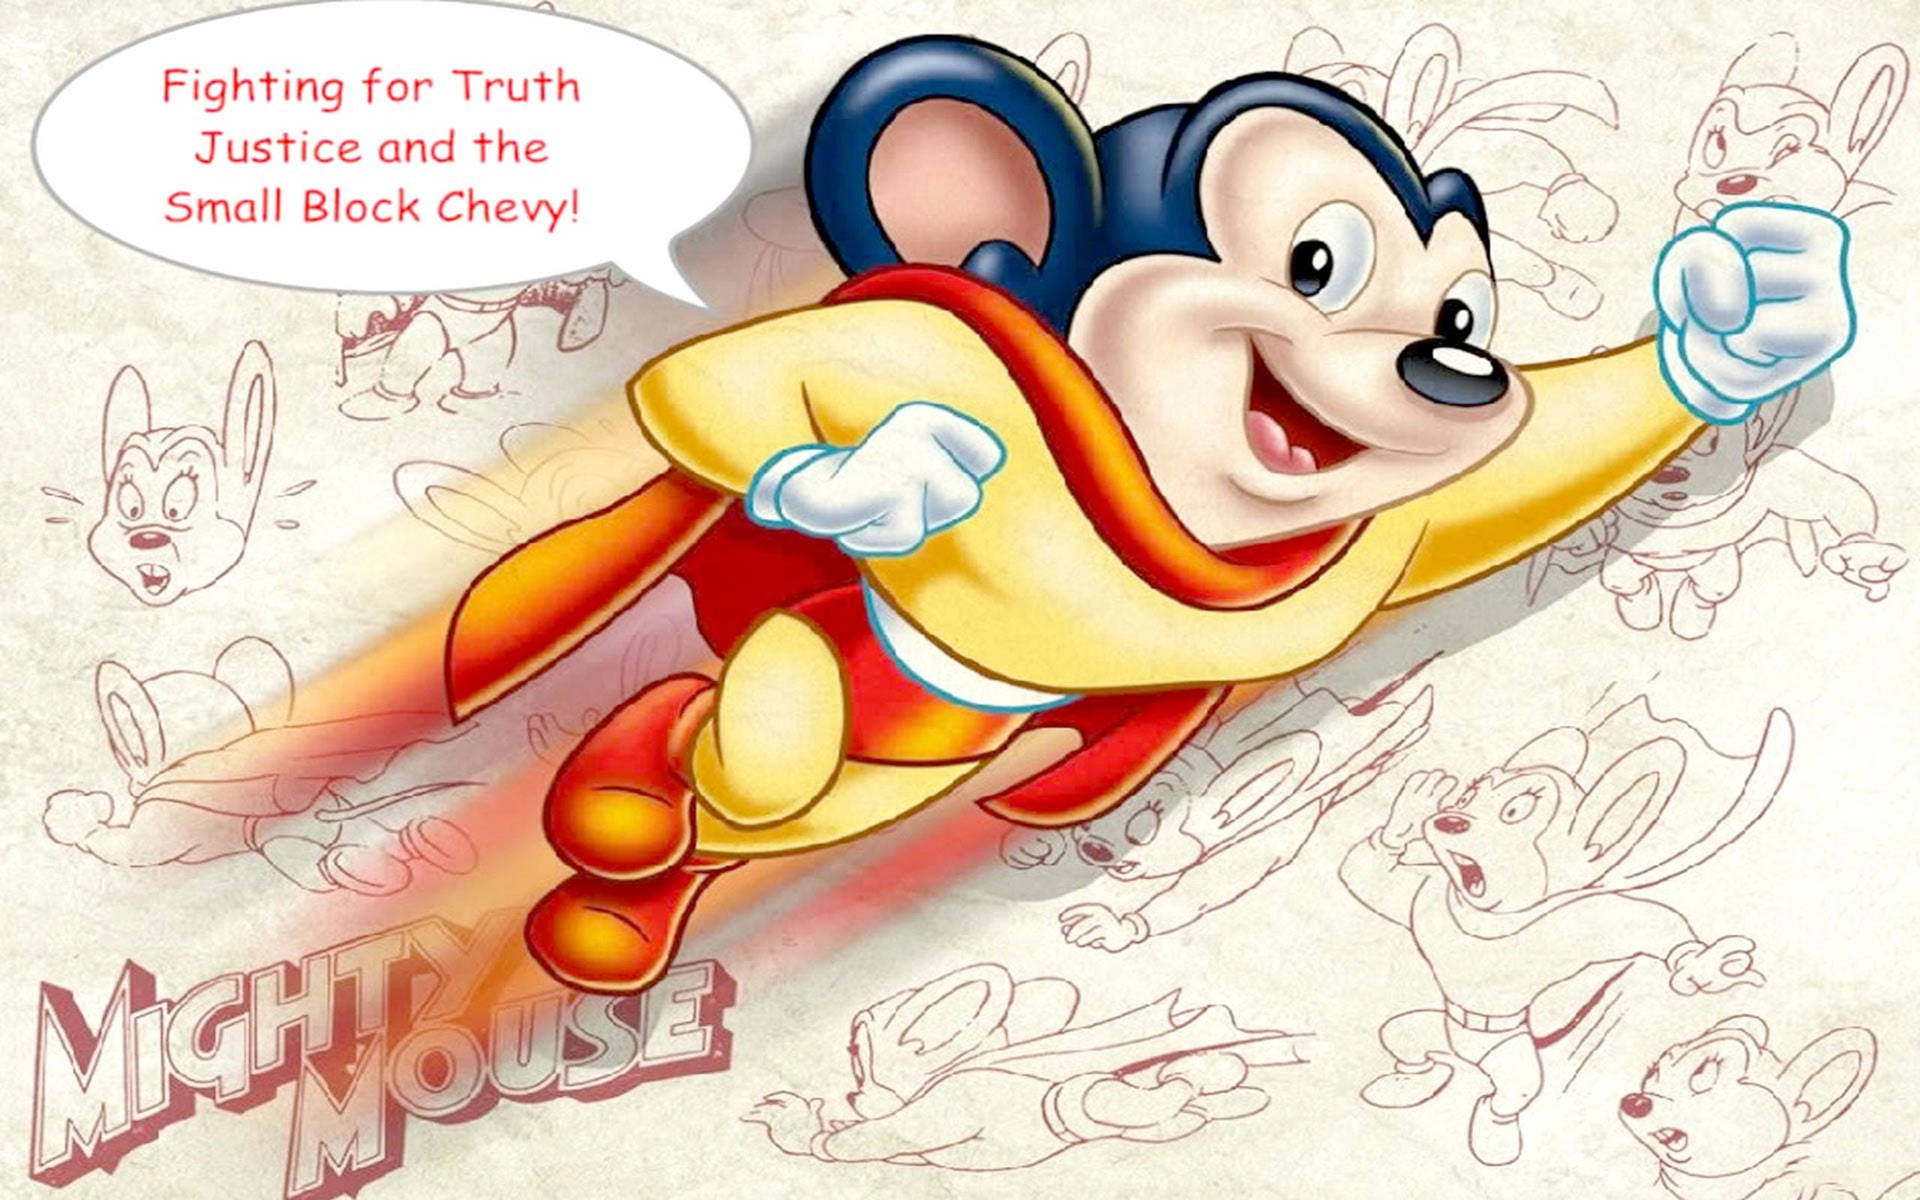 Mighty Mouse Fighting For Truth